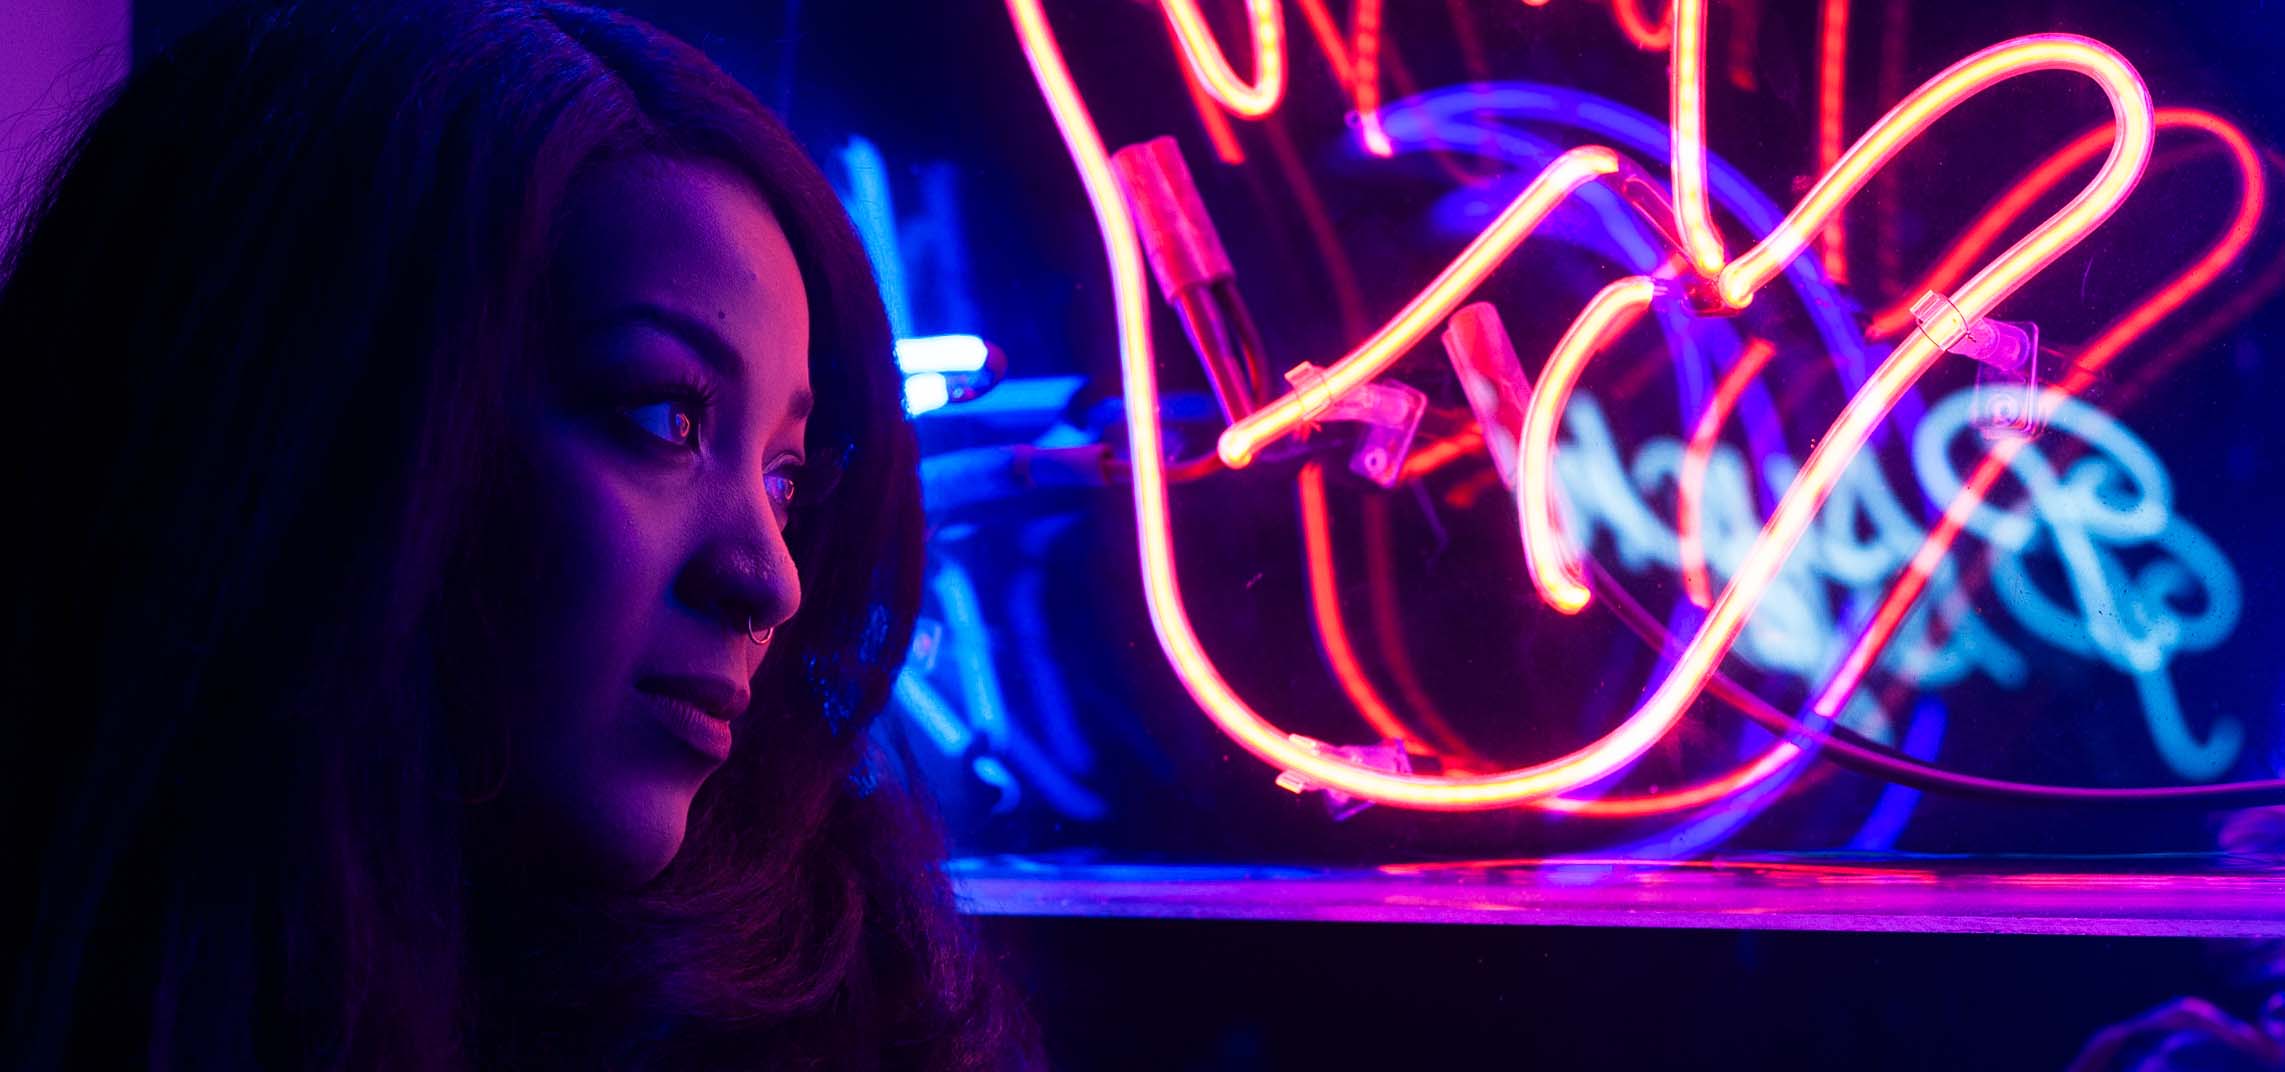 Photograph of woman looking out a window filled with neon lights.